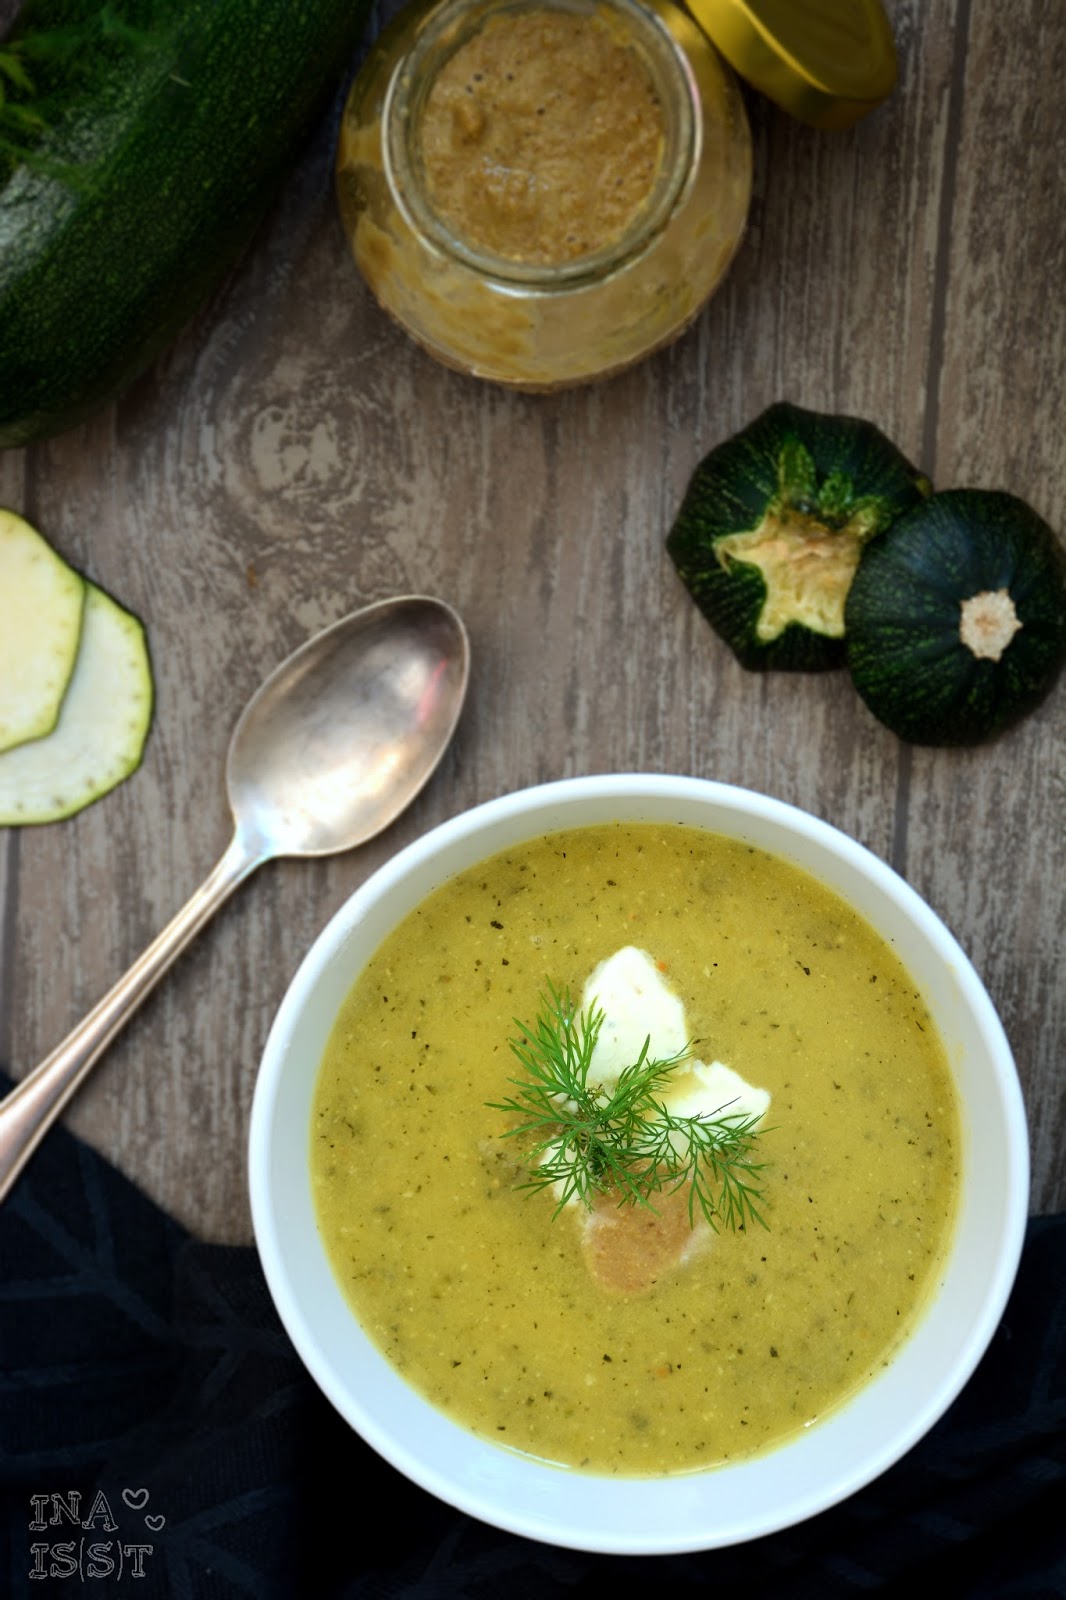 Ina Is(s)t: Zucchini-Senf-Suppe mit Dill / Zucchini soup with mustard ...